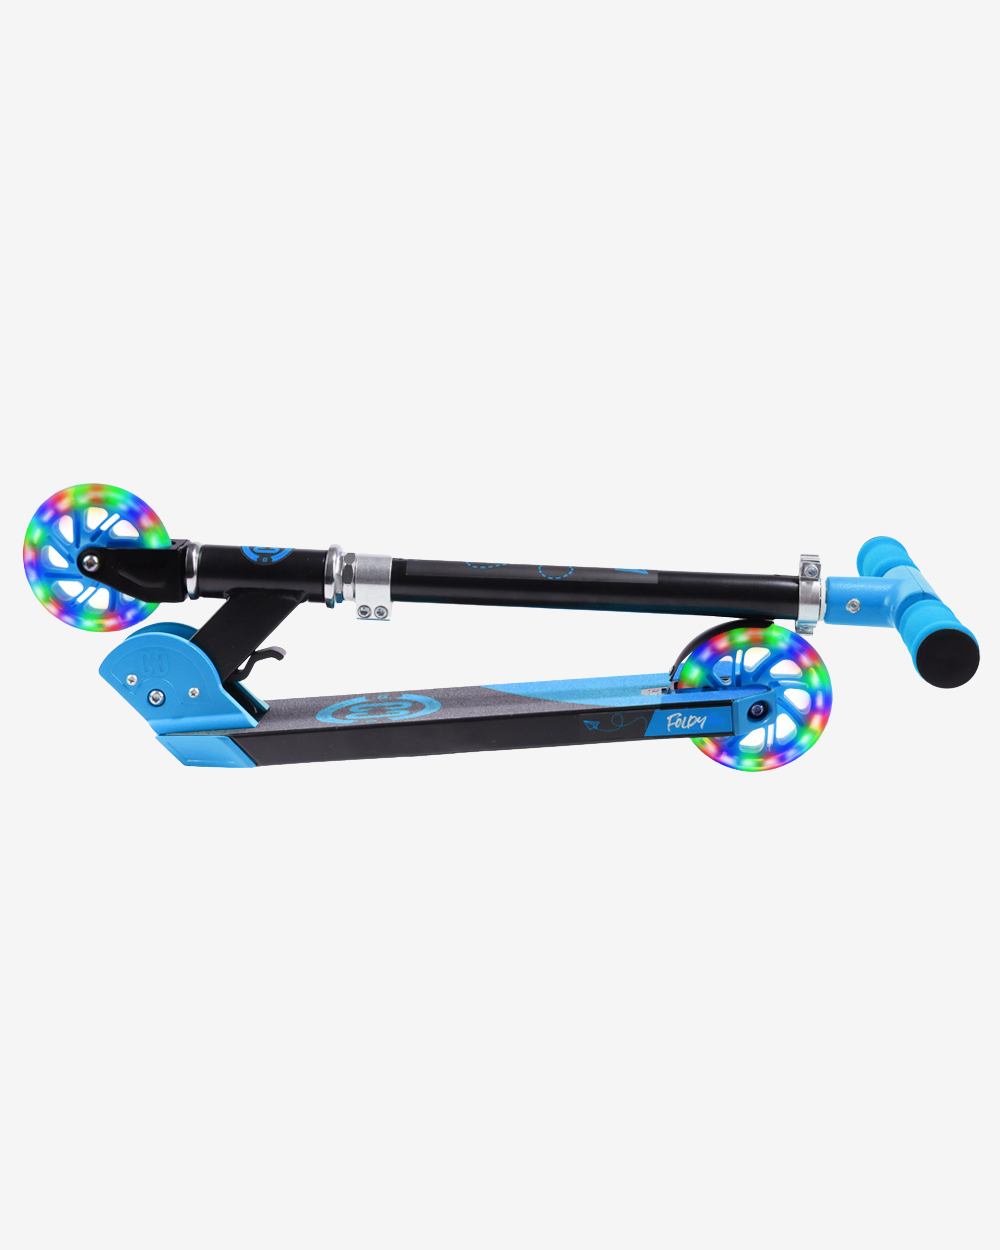 Core Kids Foldy Scooter | Blue with LED wheels